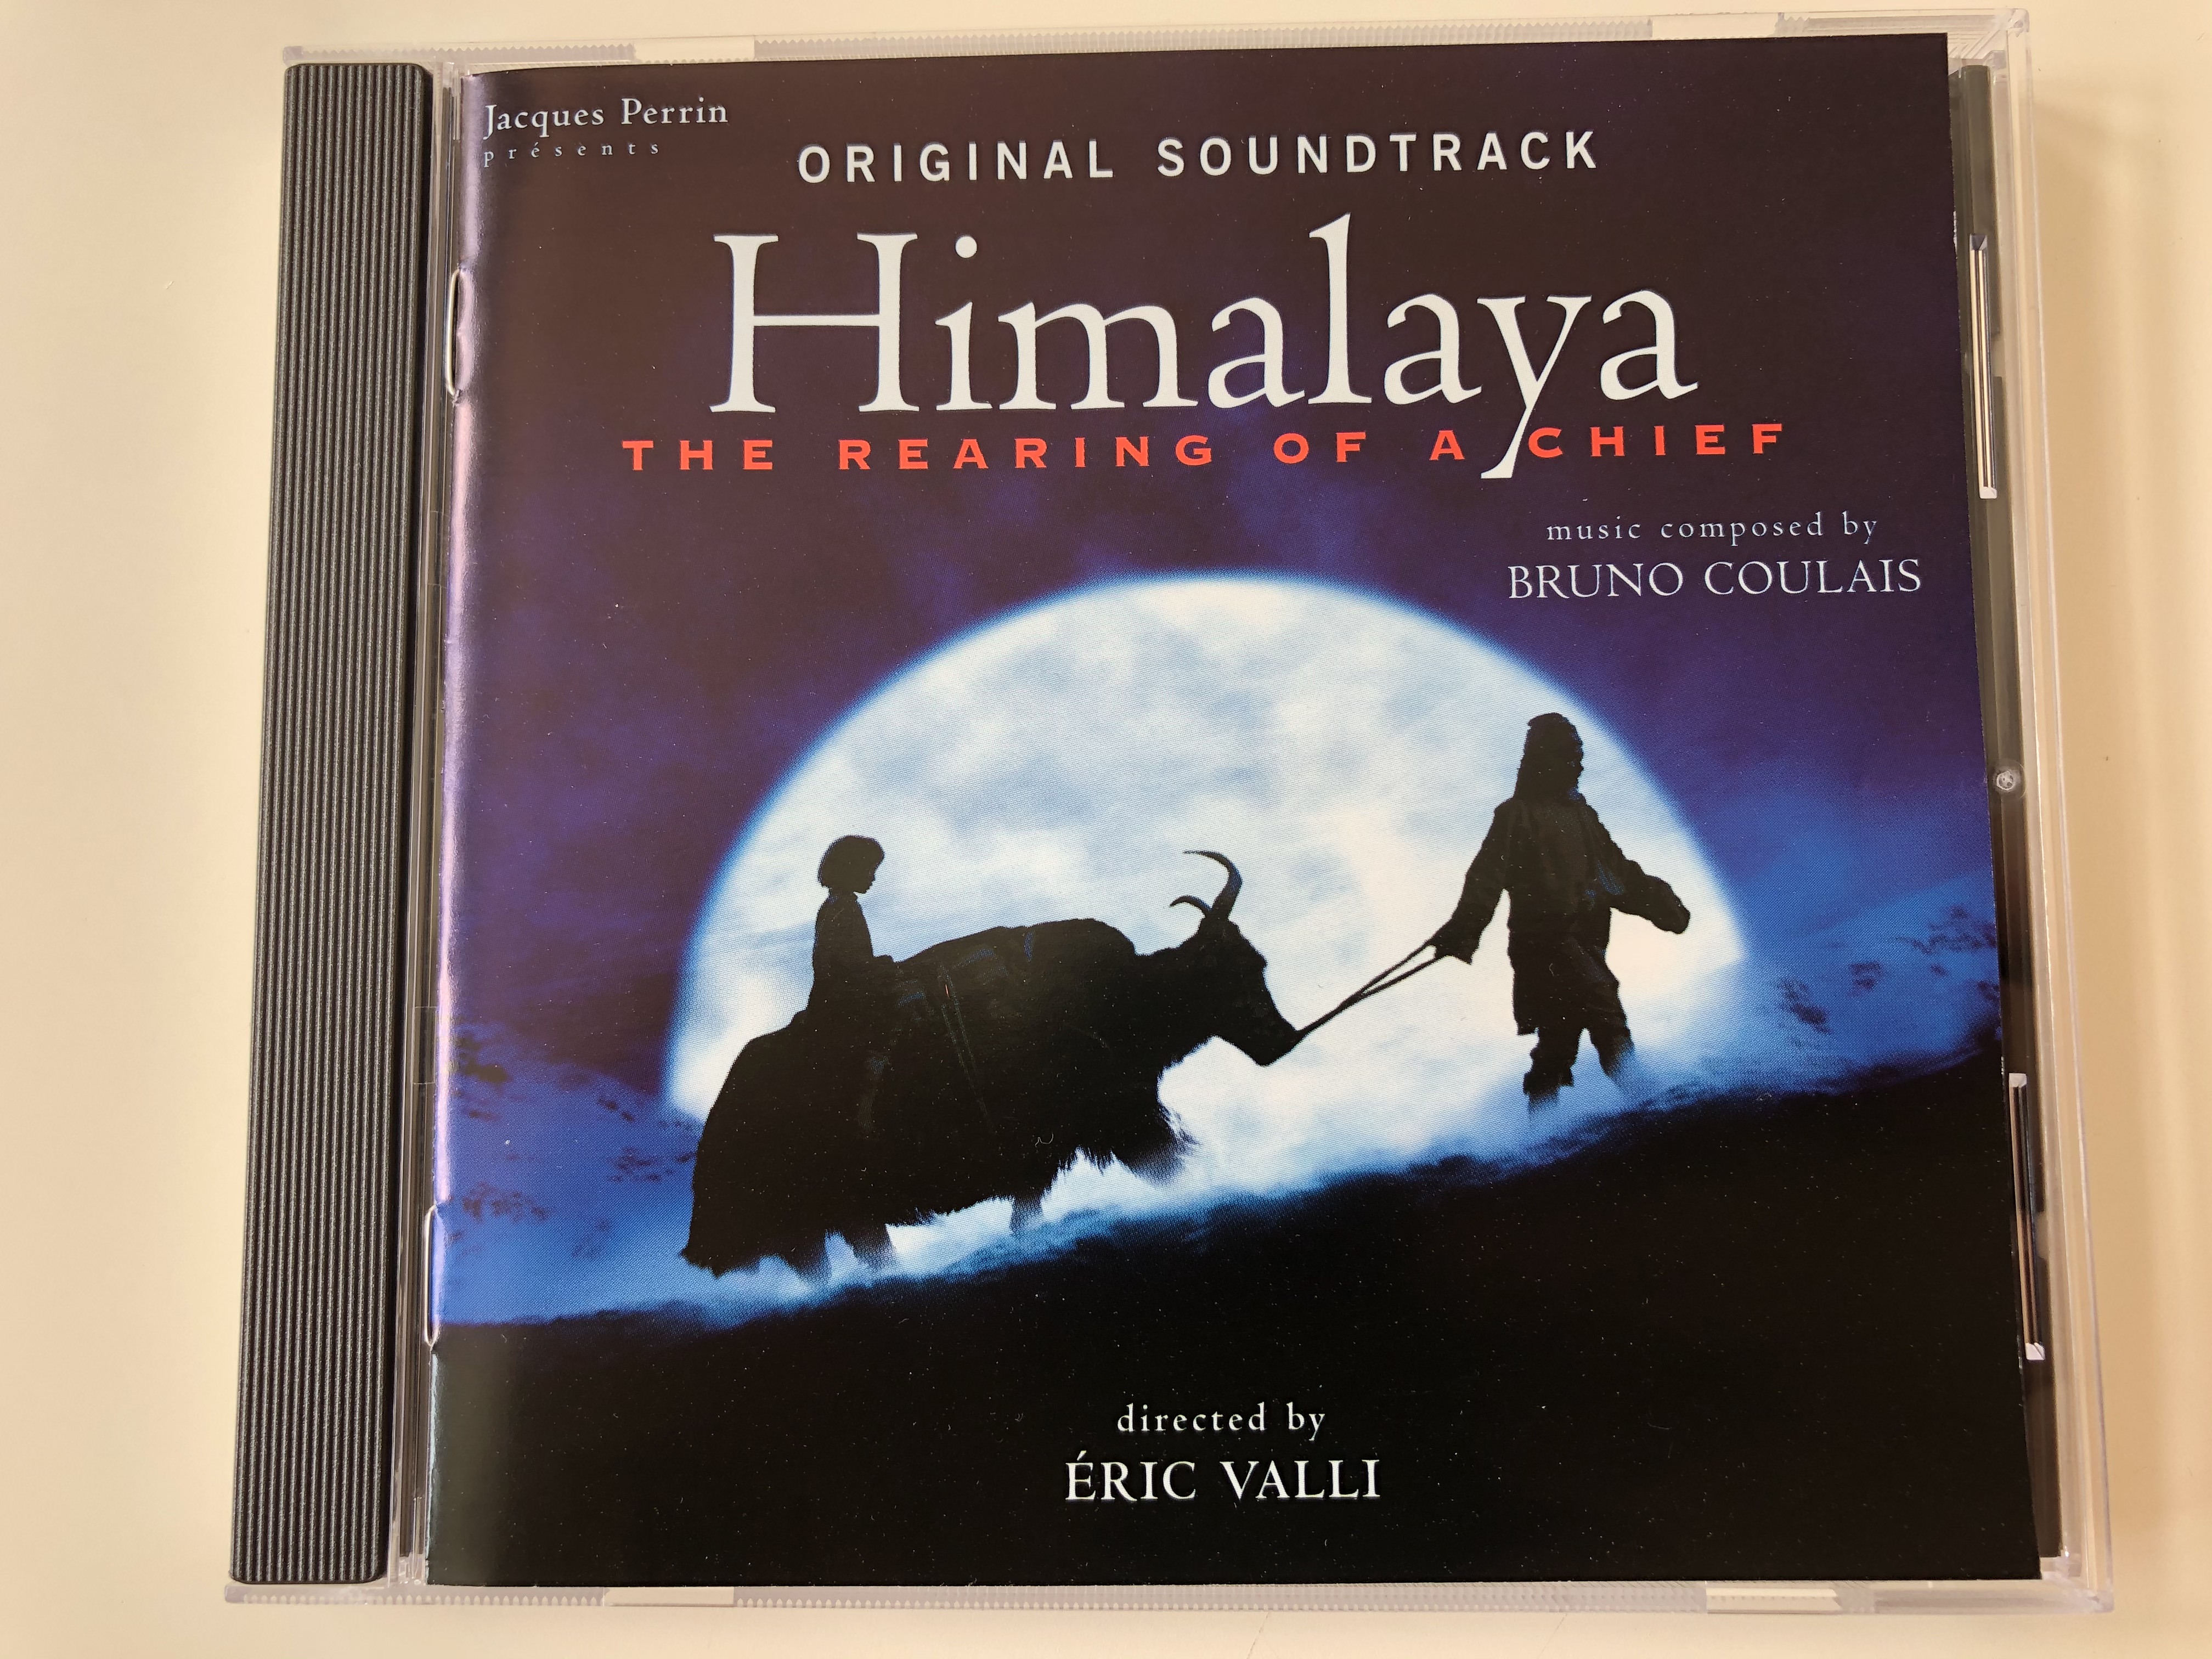 original-soundtrack-himalaya-the-rearing-of-a-chief-music-conducted-by-bruno-coulais-directed-by-eric-valli-galatee-films-audio-cd-1999-8-48645-2-1-.jpg